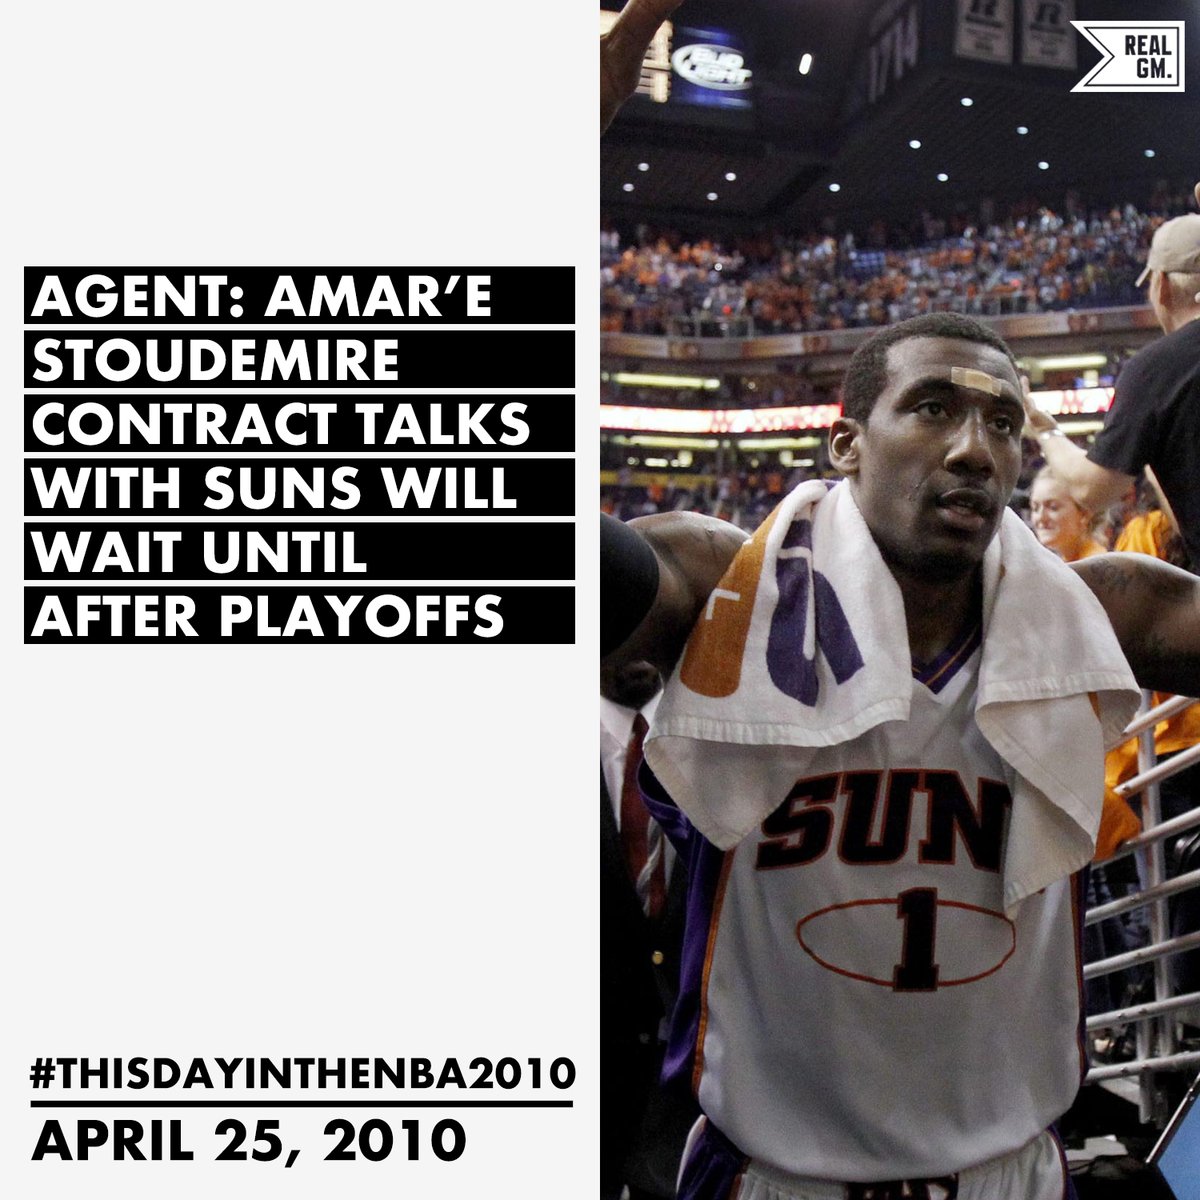  #ThisDayInTheNBA2010April 25, 2010Agent: Amare Stoudemire Contract Talks With Suns Will Wait Until After Playoffs  https://basketball.realgm.com/wiretap/203505/Agent-Amare-Stoudemire-Contract-Talks-With-Suns-Will-Wait-Until-After-Playoffs